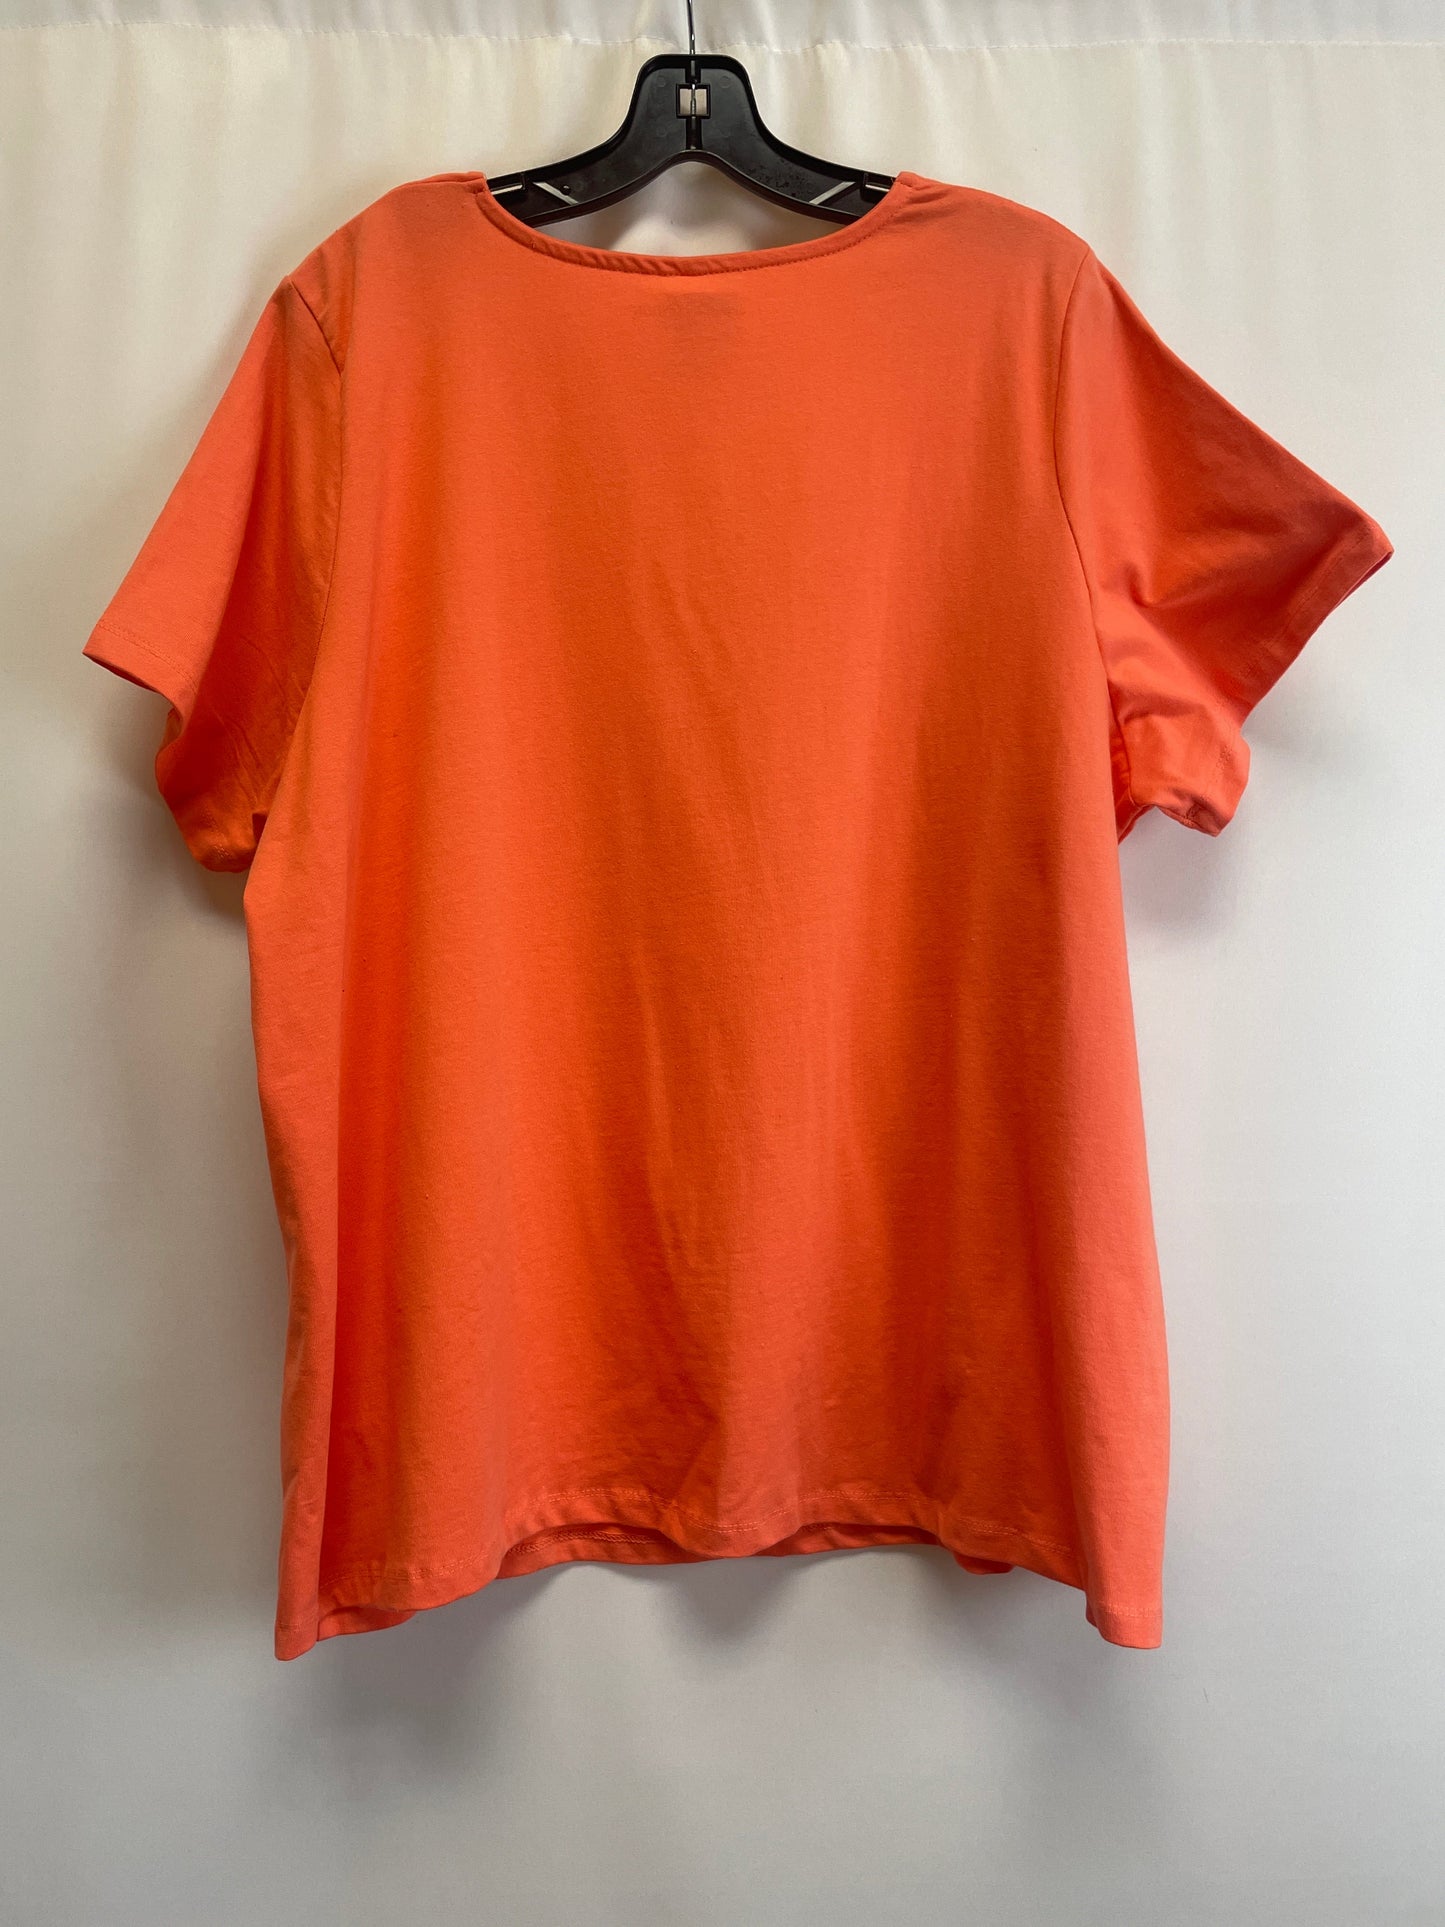 Top Short Sleeve By Jessica London  Size: 1x